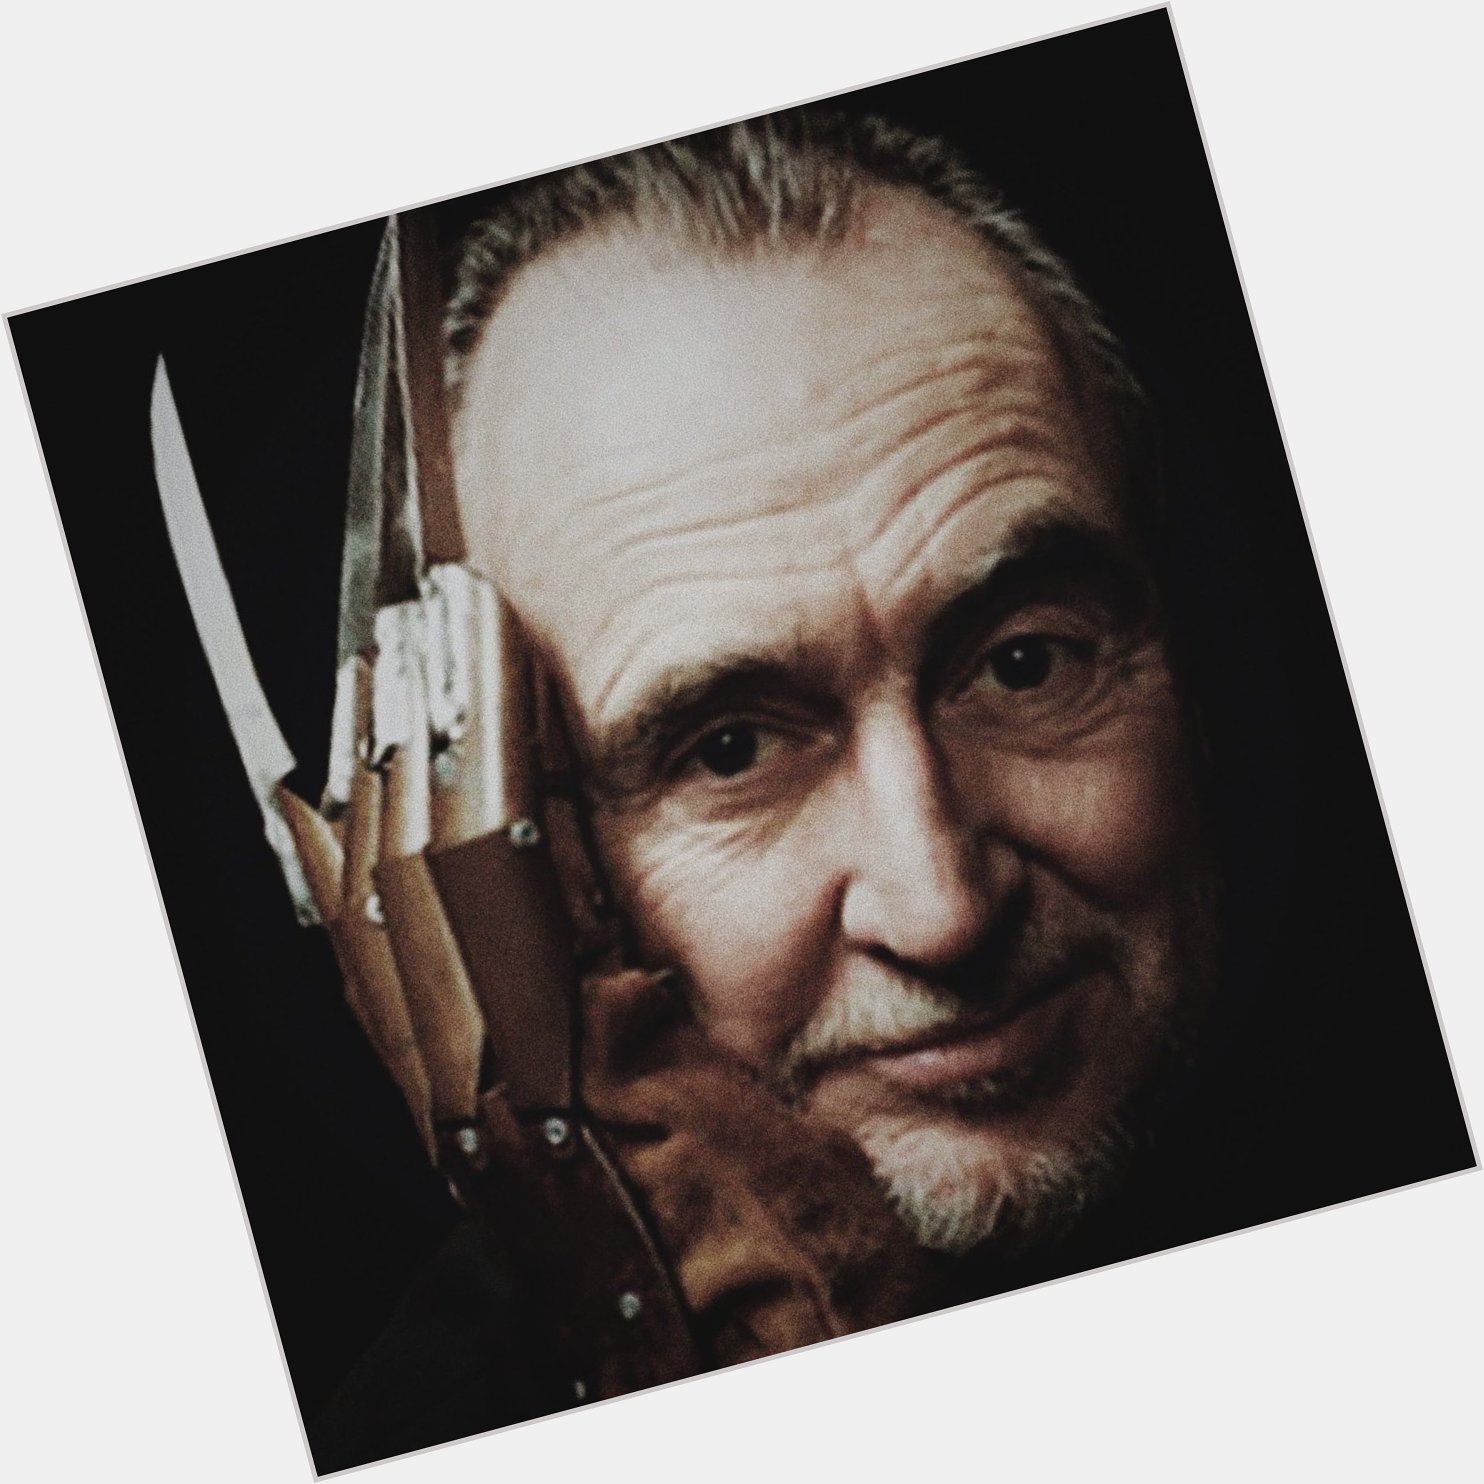 Happy birthday to one of my favorite people ever, wes craven. you will live forever in horror. love you 